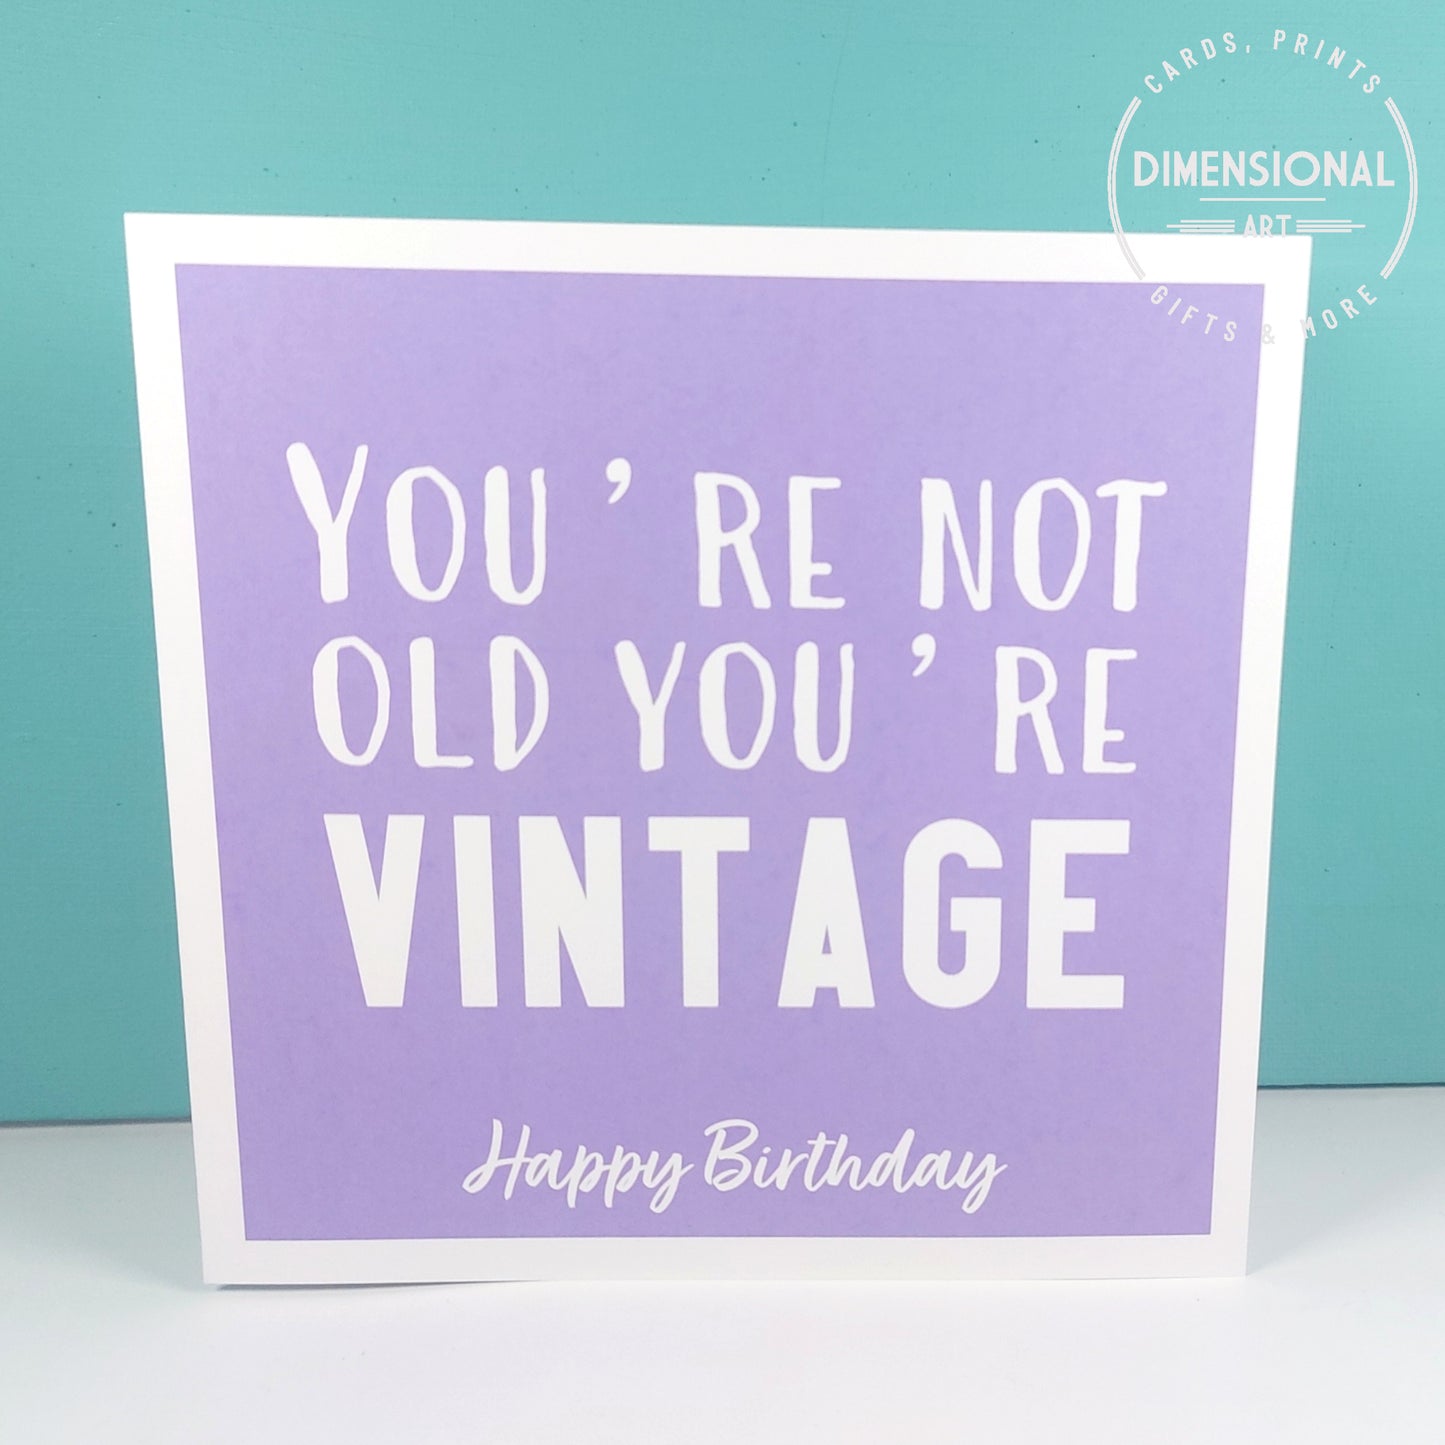 You're not old you're vintage - Birthday Card